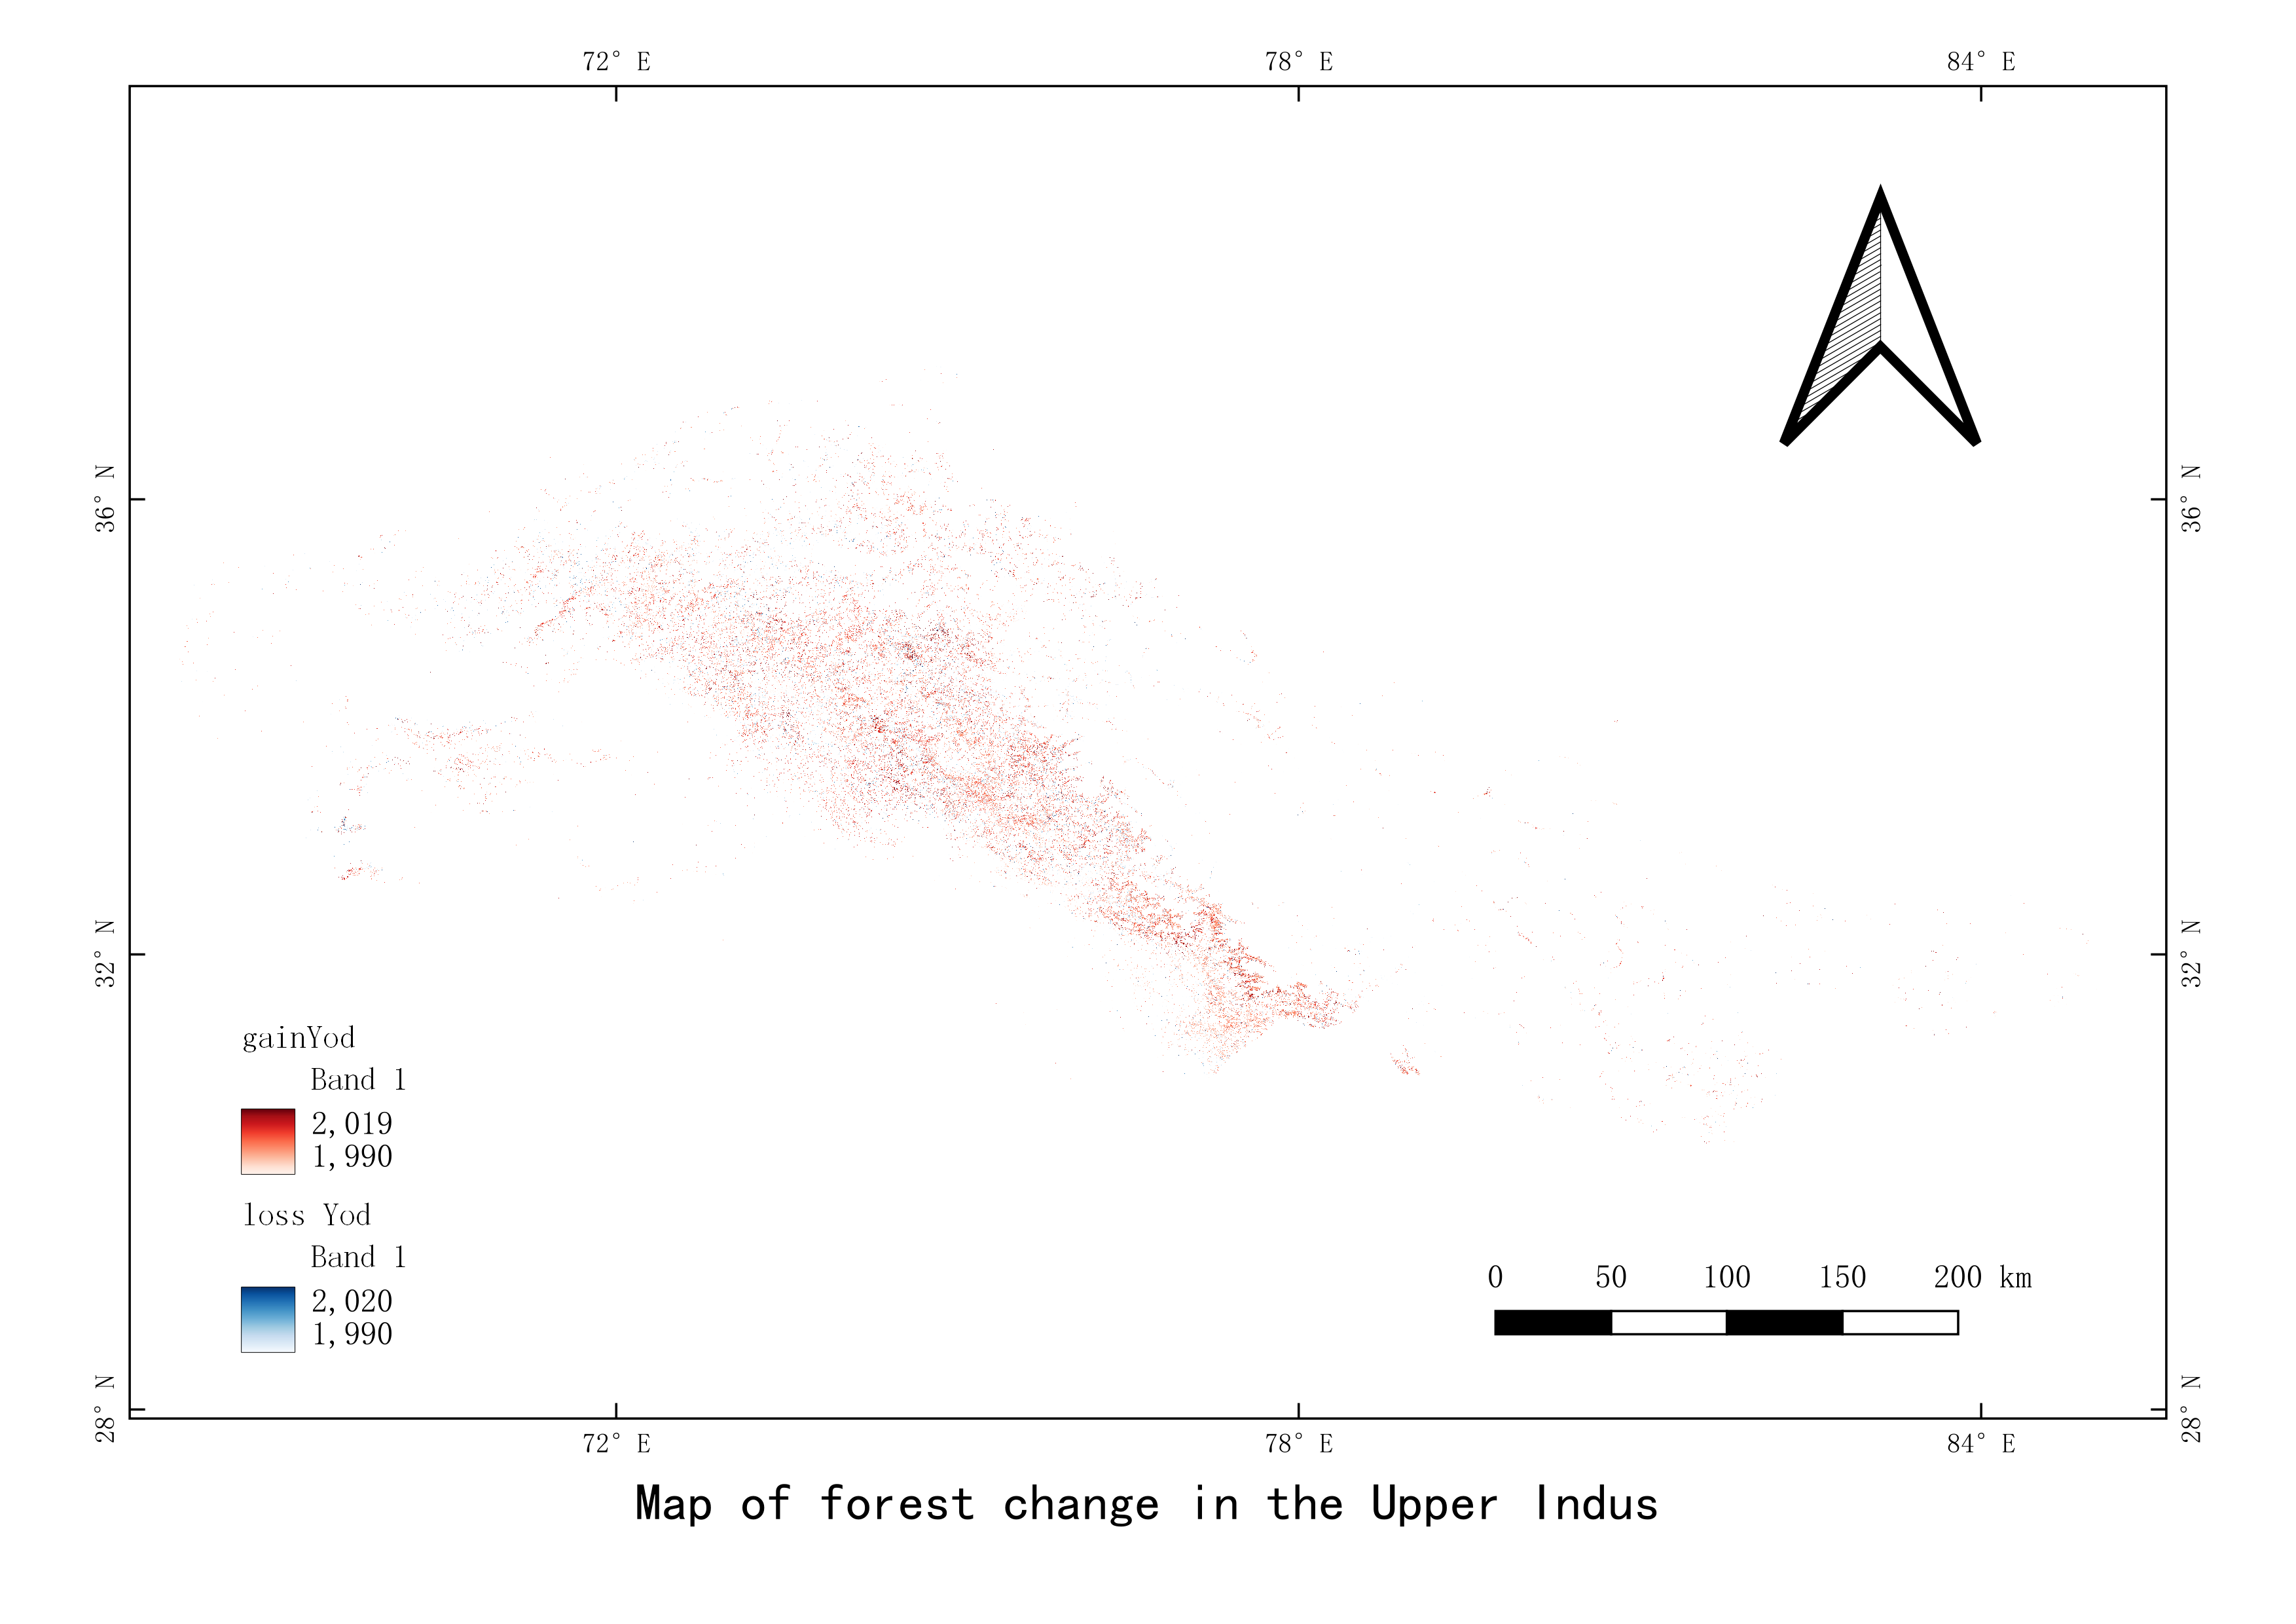 Forest change dataset for the upper Indus Valley